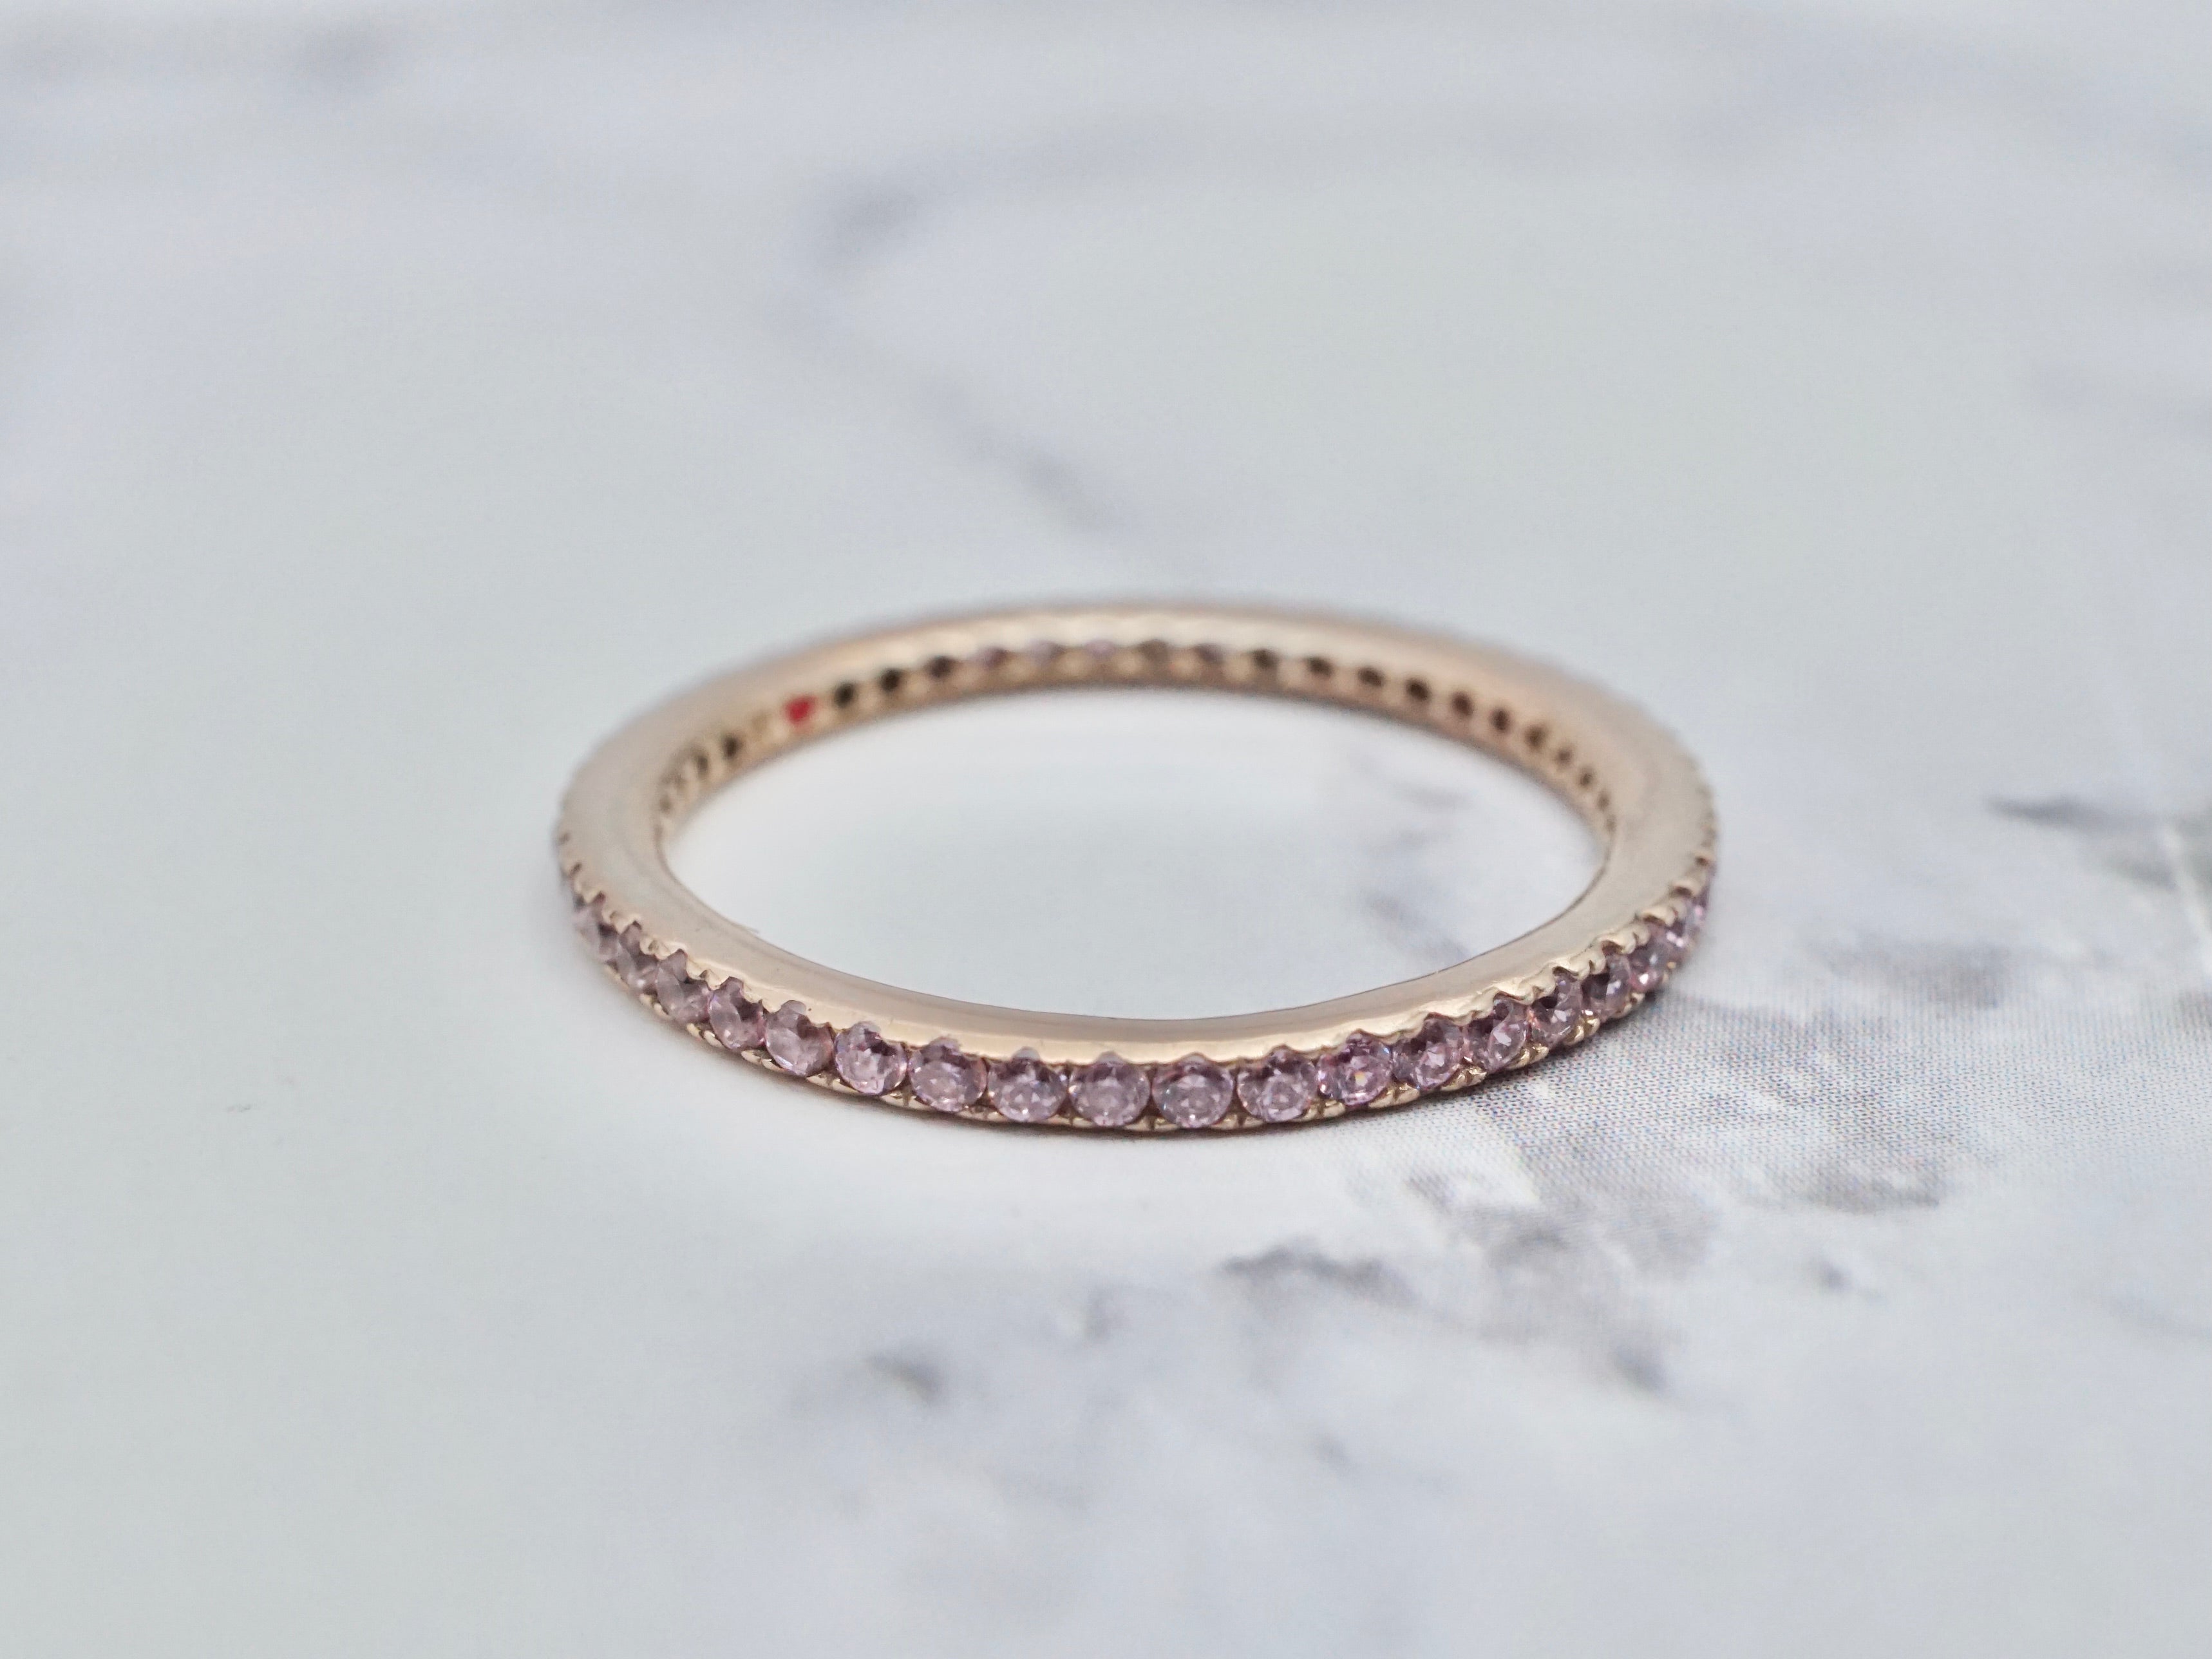 Vintage gold-plated sterling & pink cubic zirconia eternity band, size 6.25